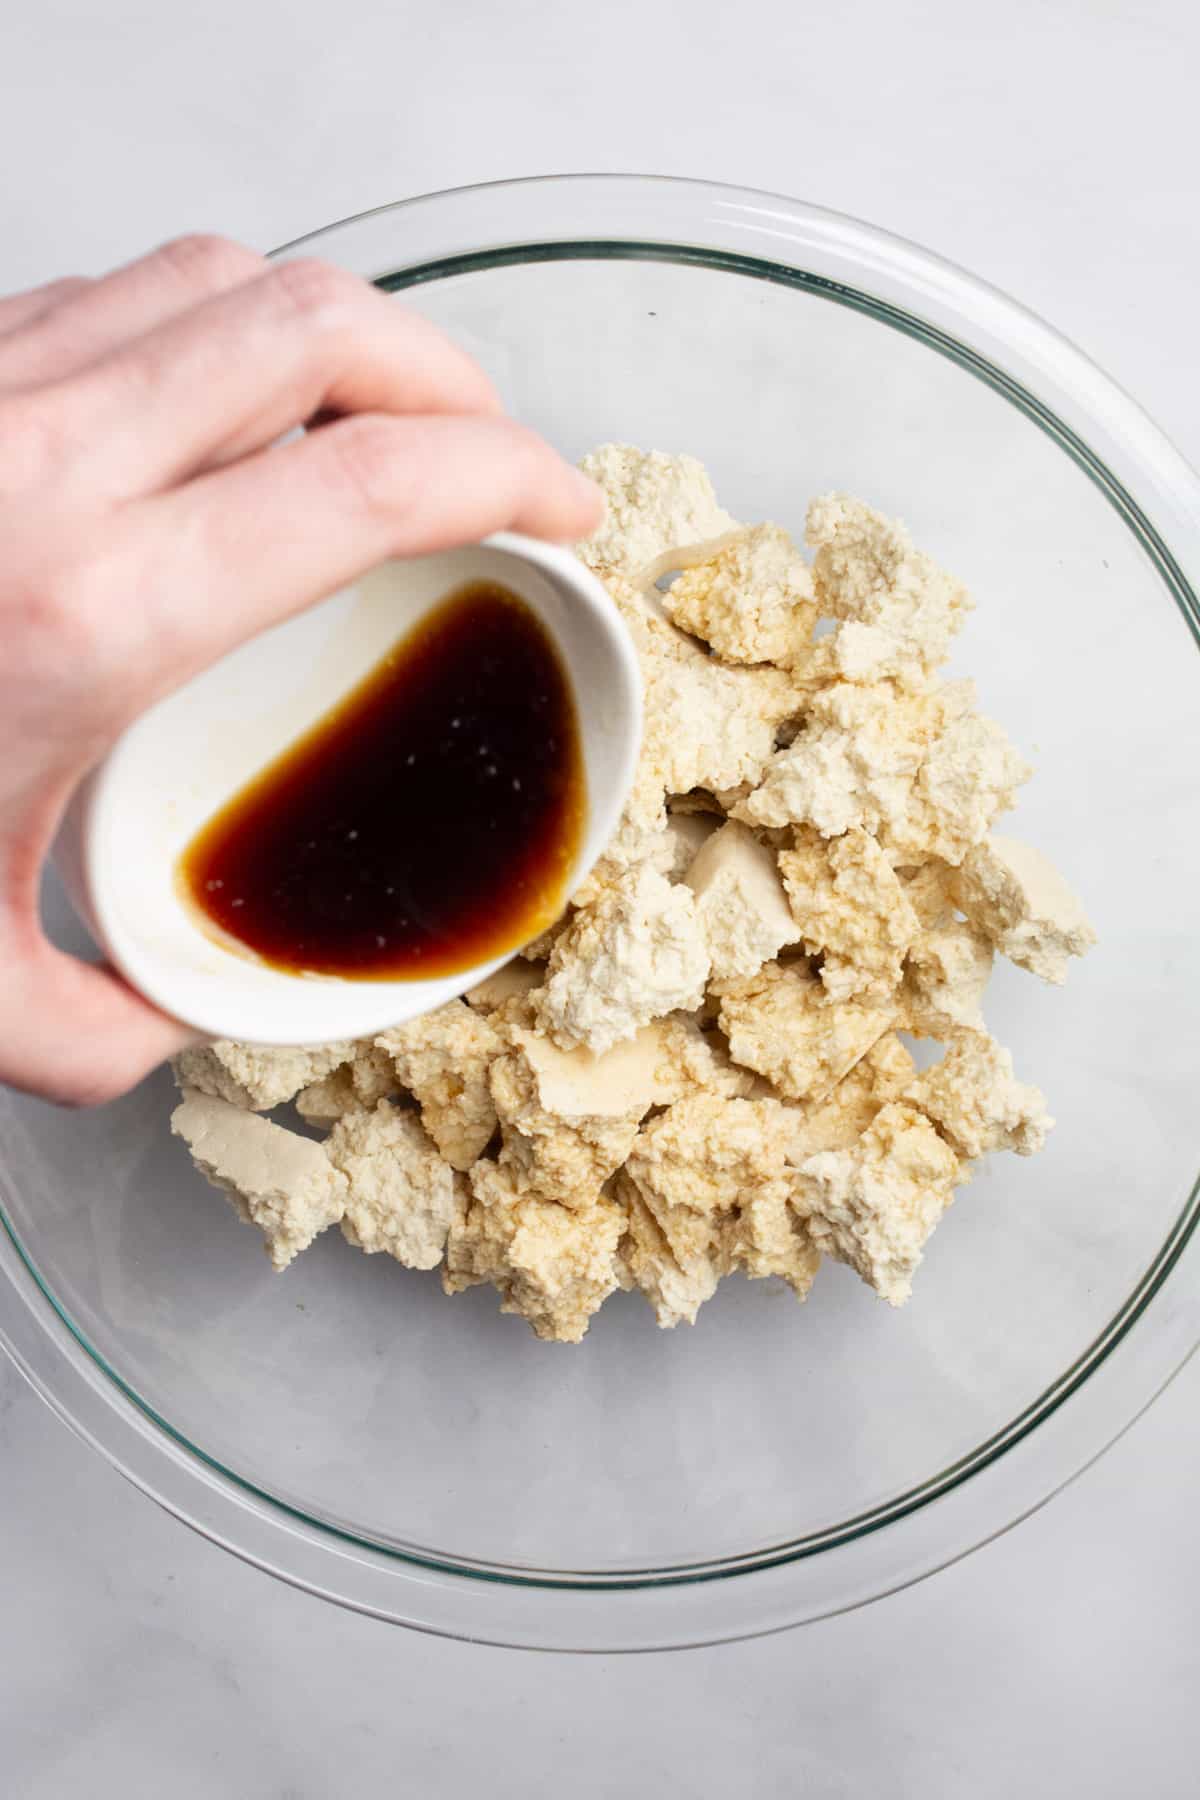 Soy sauce mix being poured over chunks of tofu.